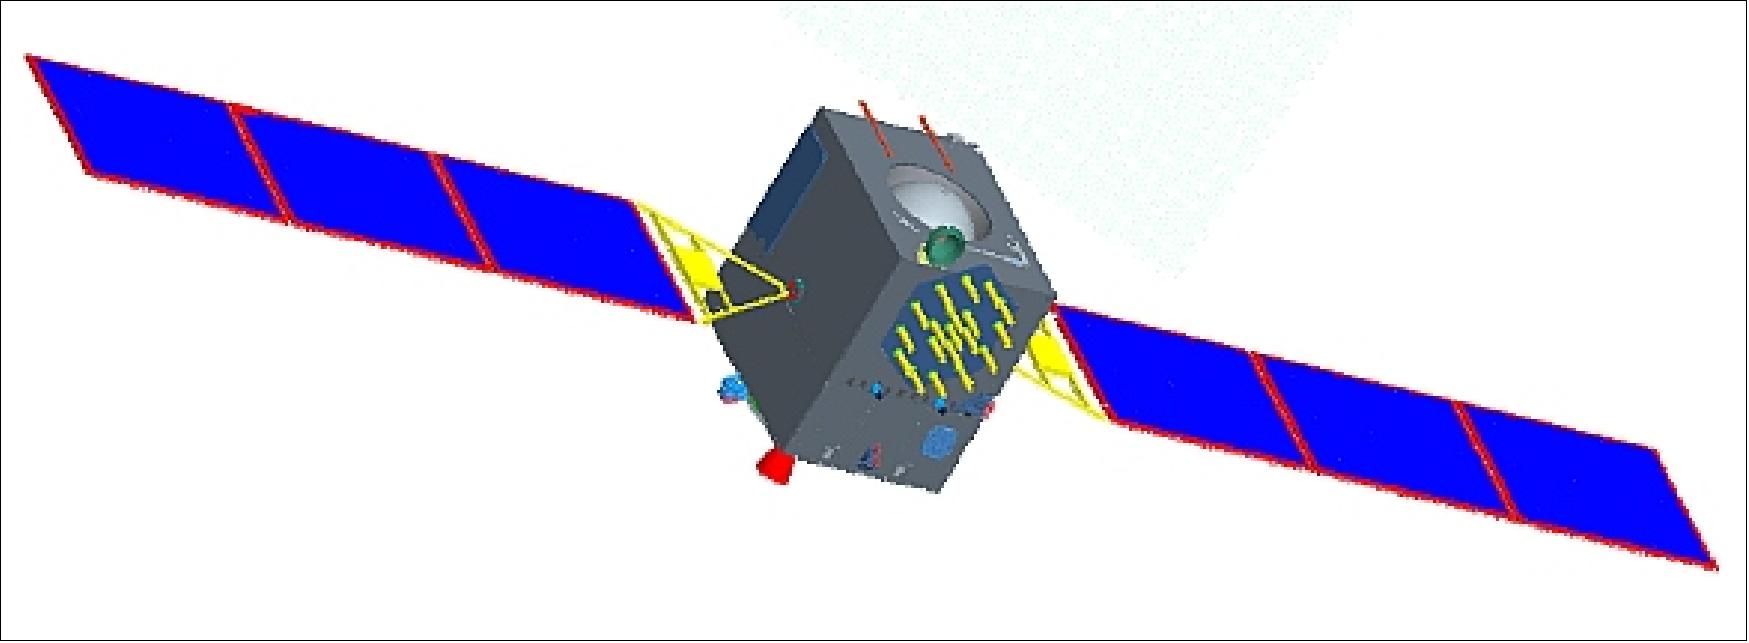 Figure 3: Illustration of the MEO spacecraft (image credit: DFH/CAST)